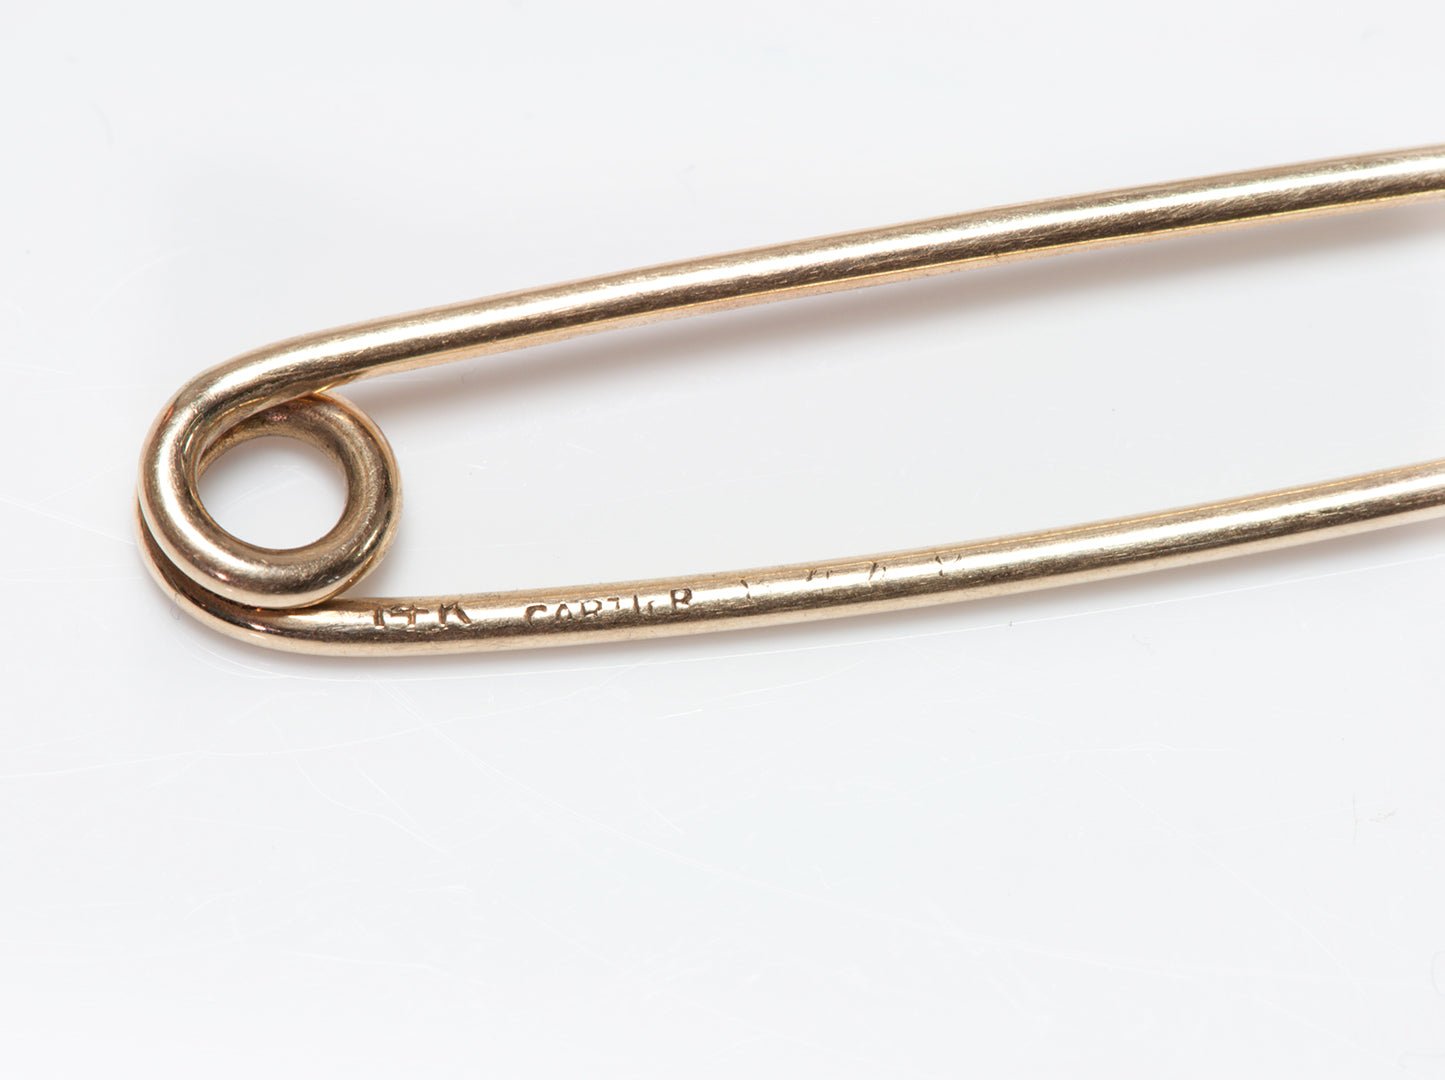 Vintage Cartier 14K Gold Safety Pin